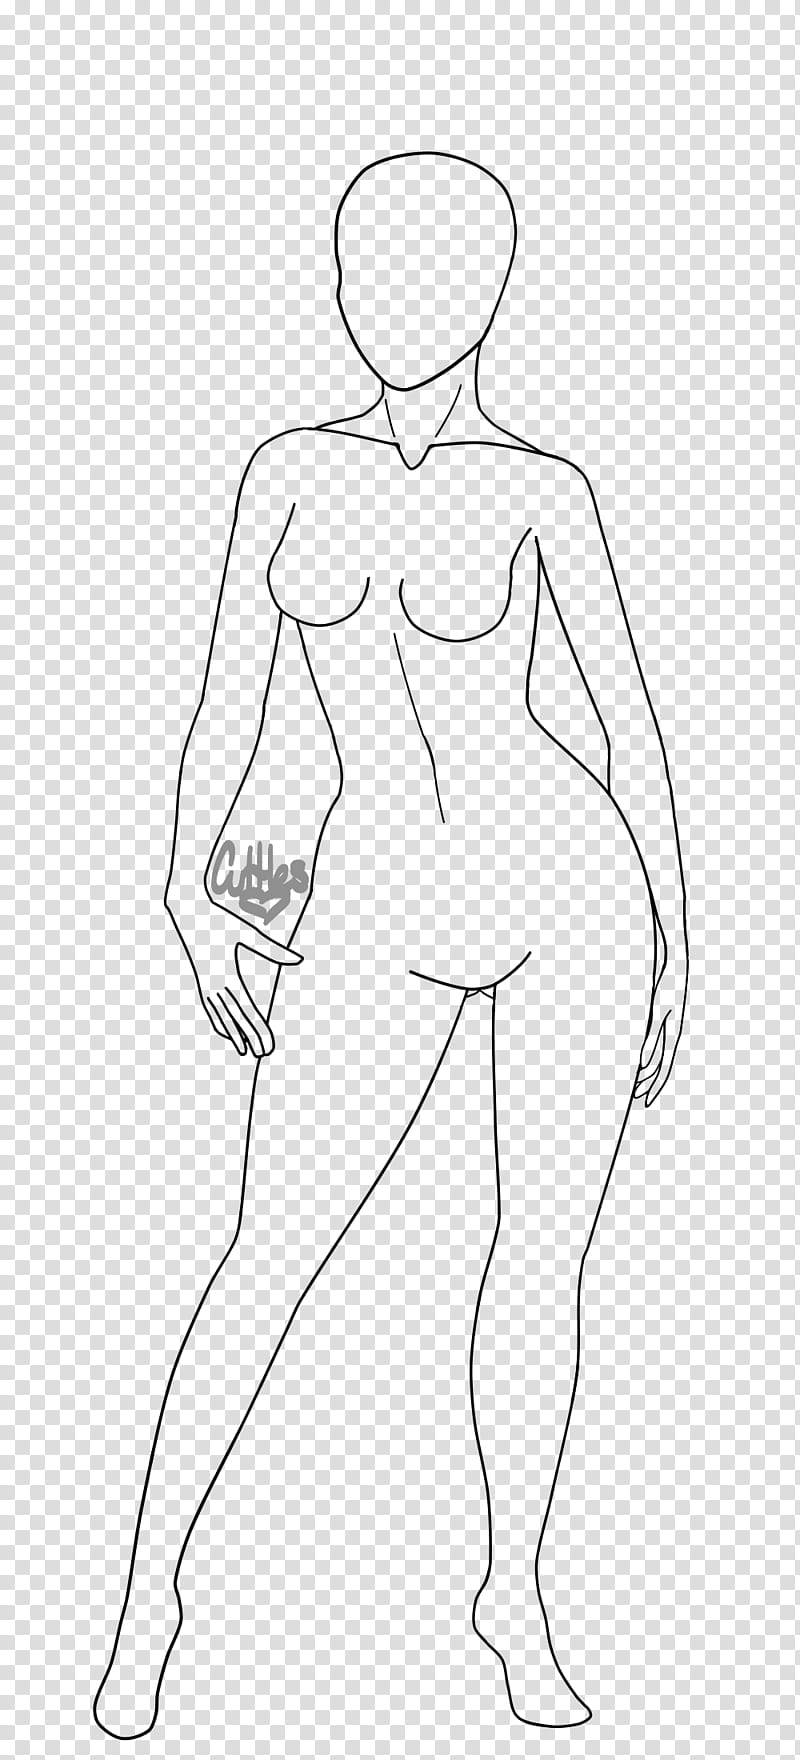 Female Body Base Lineart  illustration of woman animated transparent  background PNG clipart  HiClipart